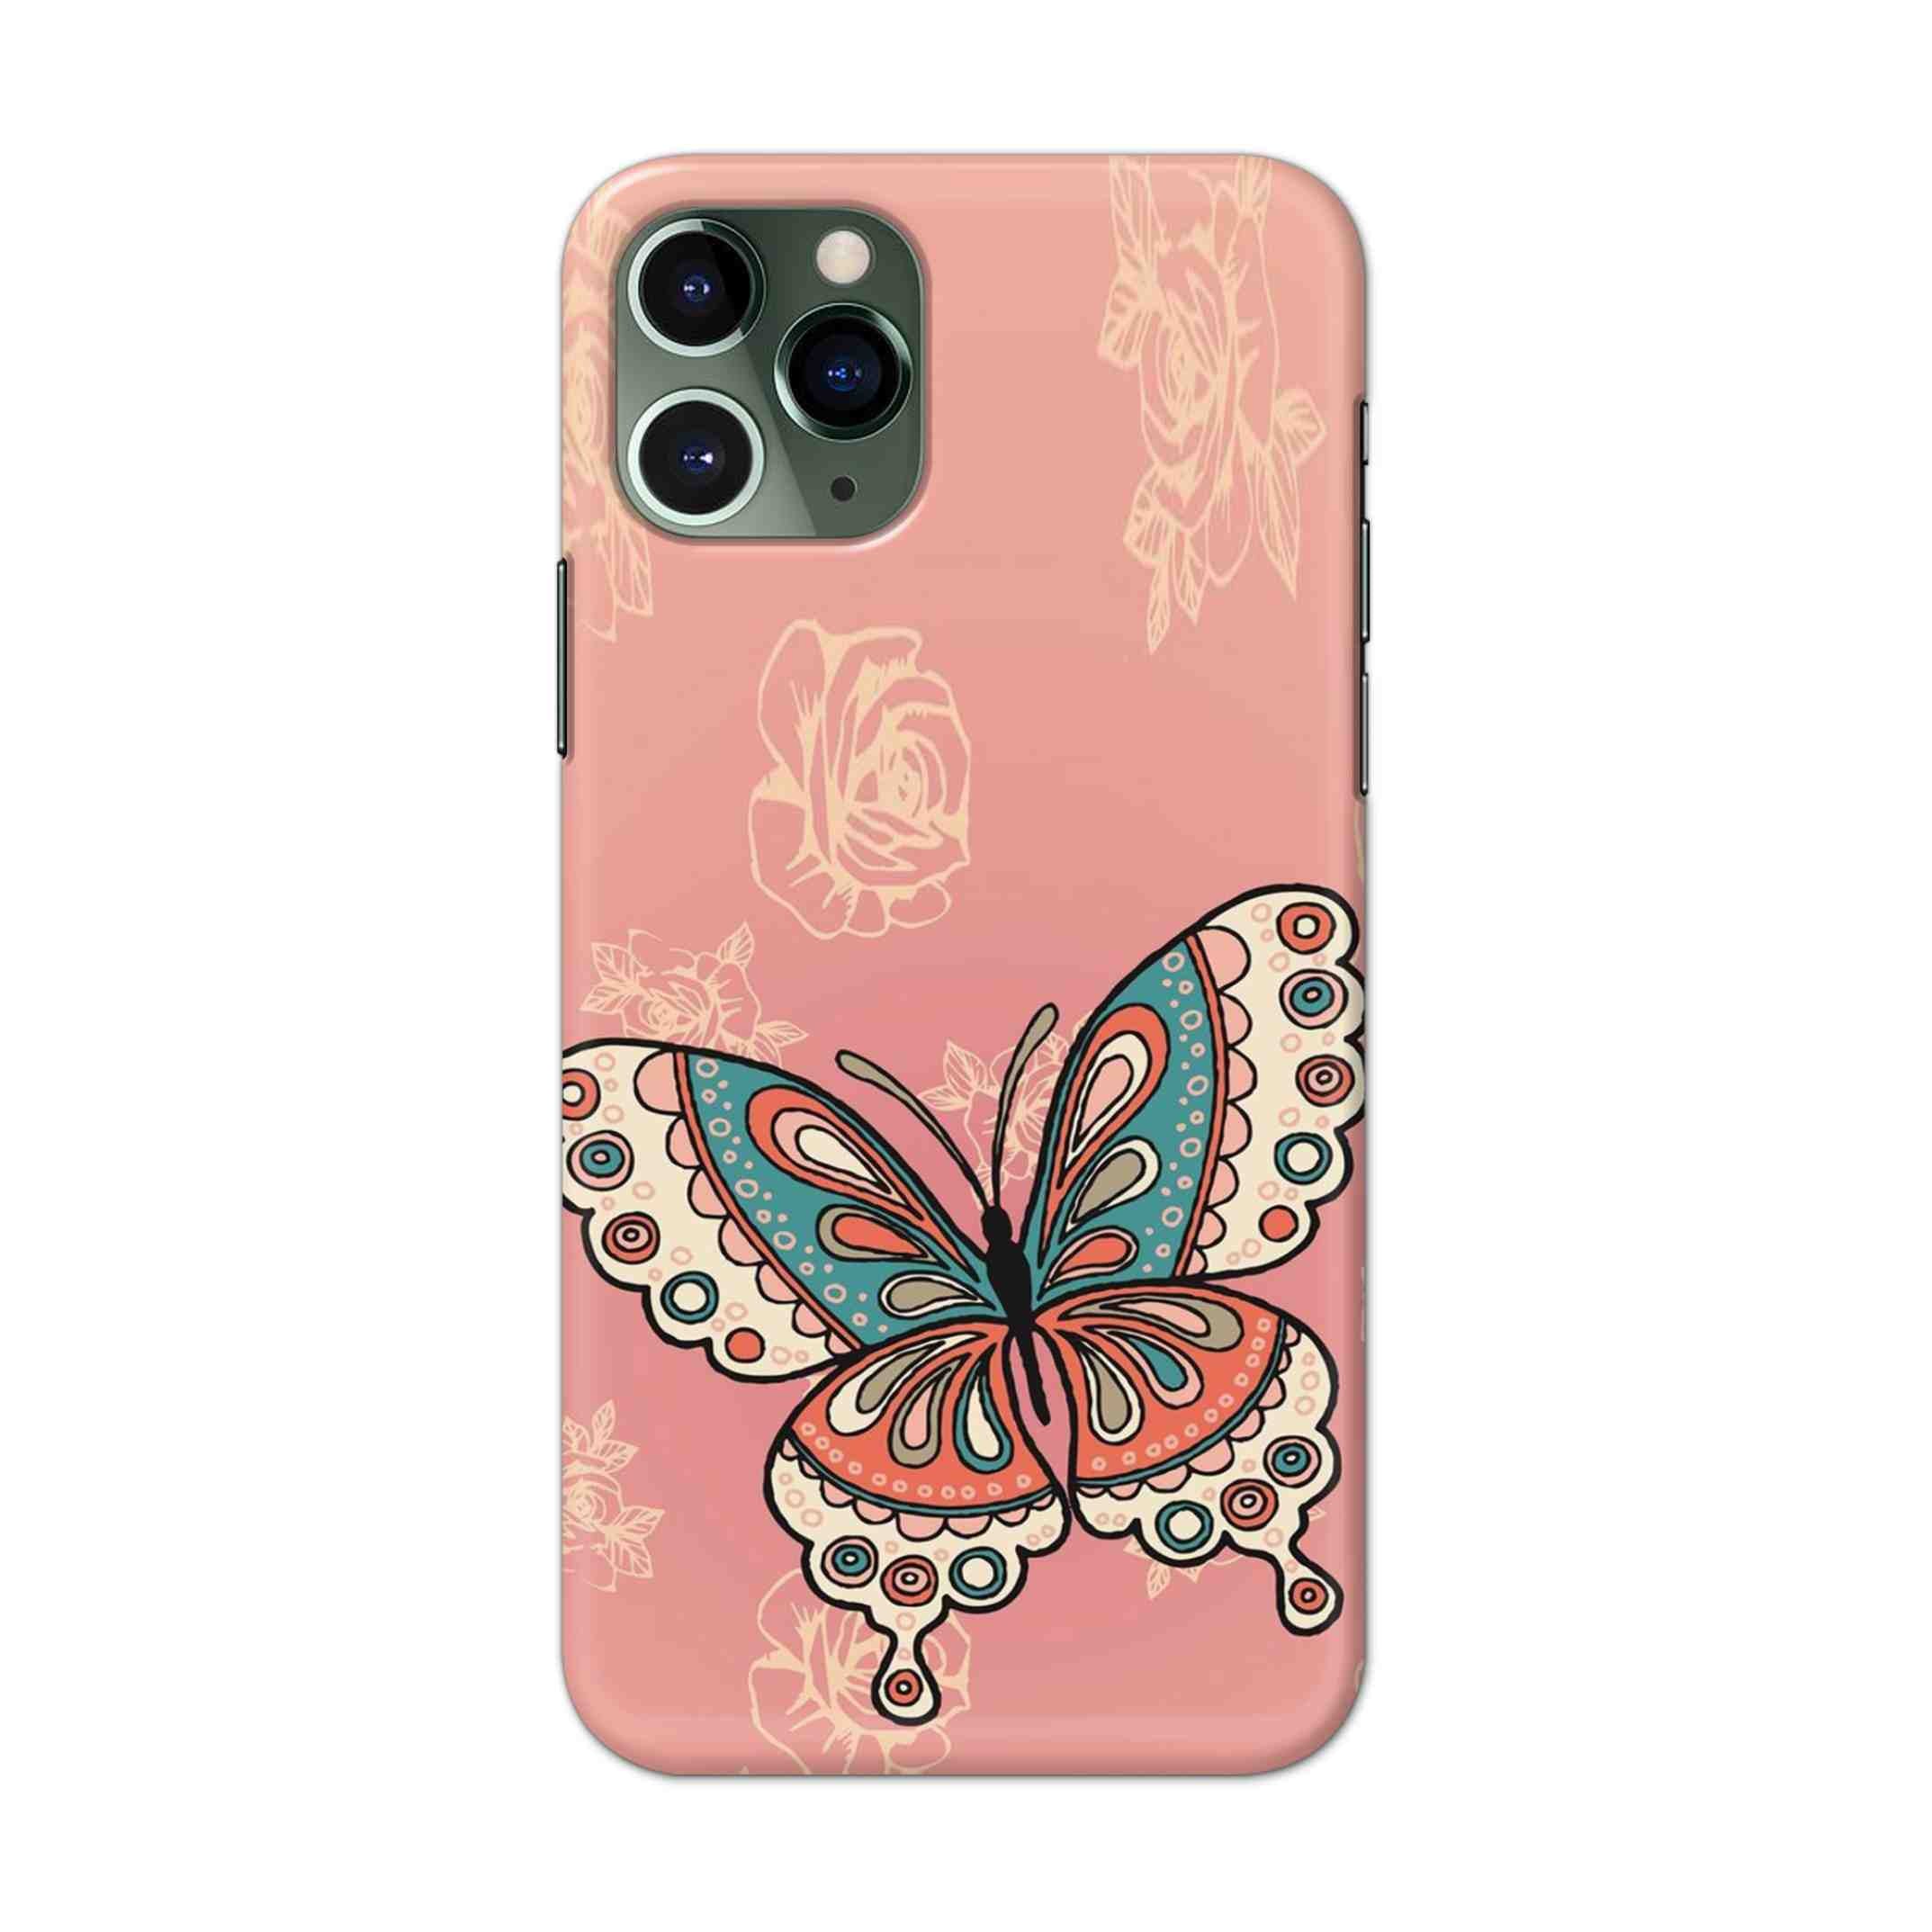 Buy Butterfly Hard Back Mobile Phone Case/Cover For iPhone 11 Pro Online